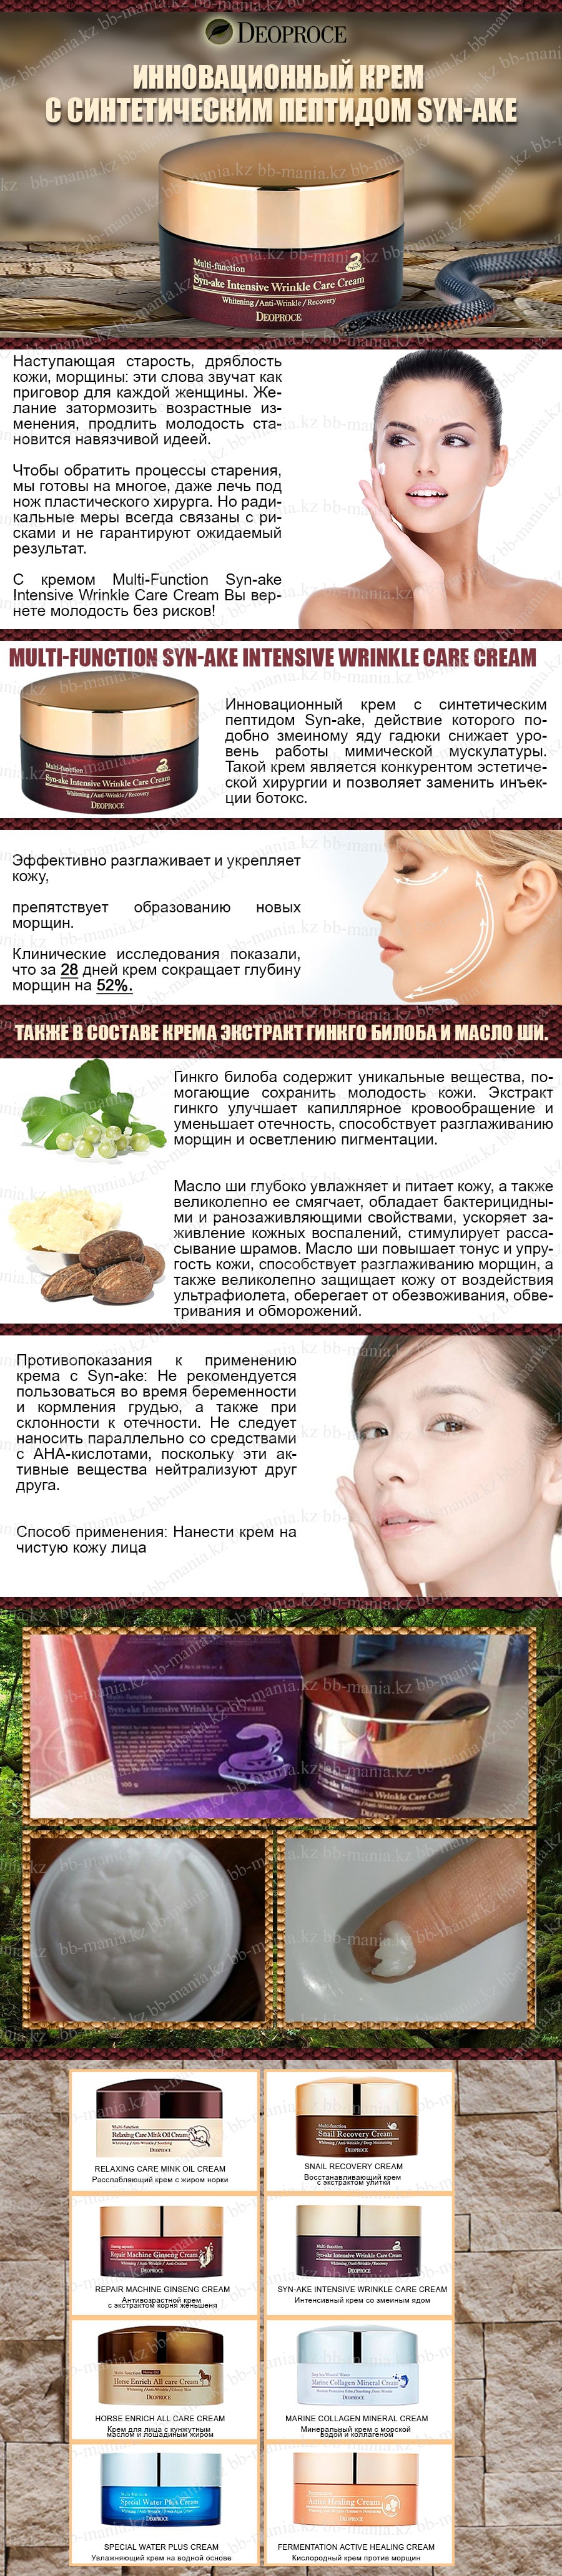 Multi-Function-Syn-ake-Intensive-Wrinkle-Care-Cream-[Deoproce]-min